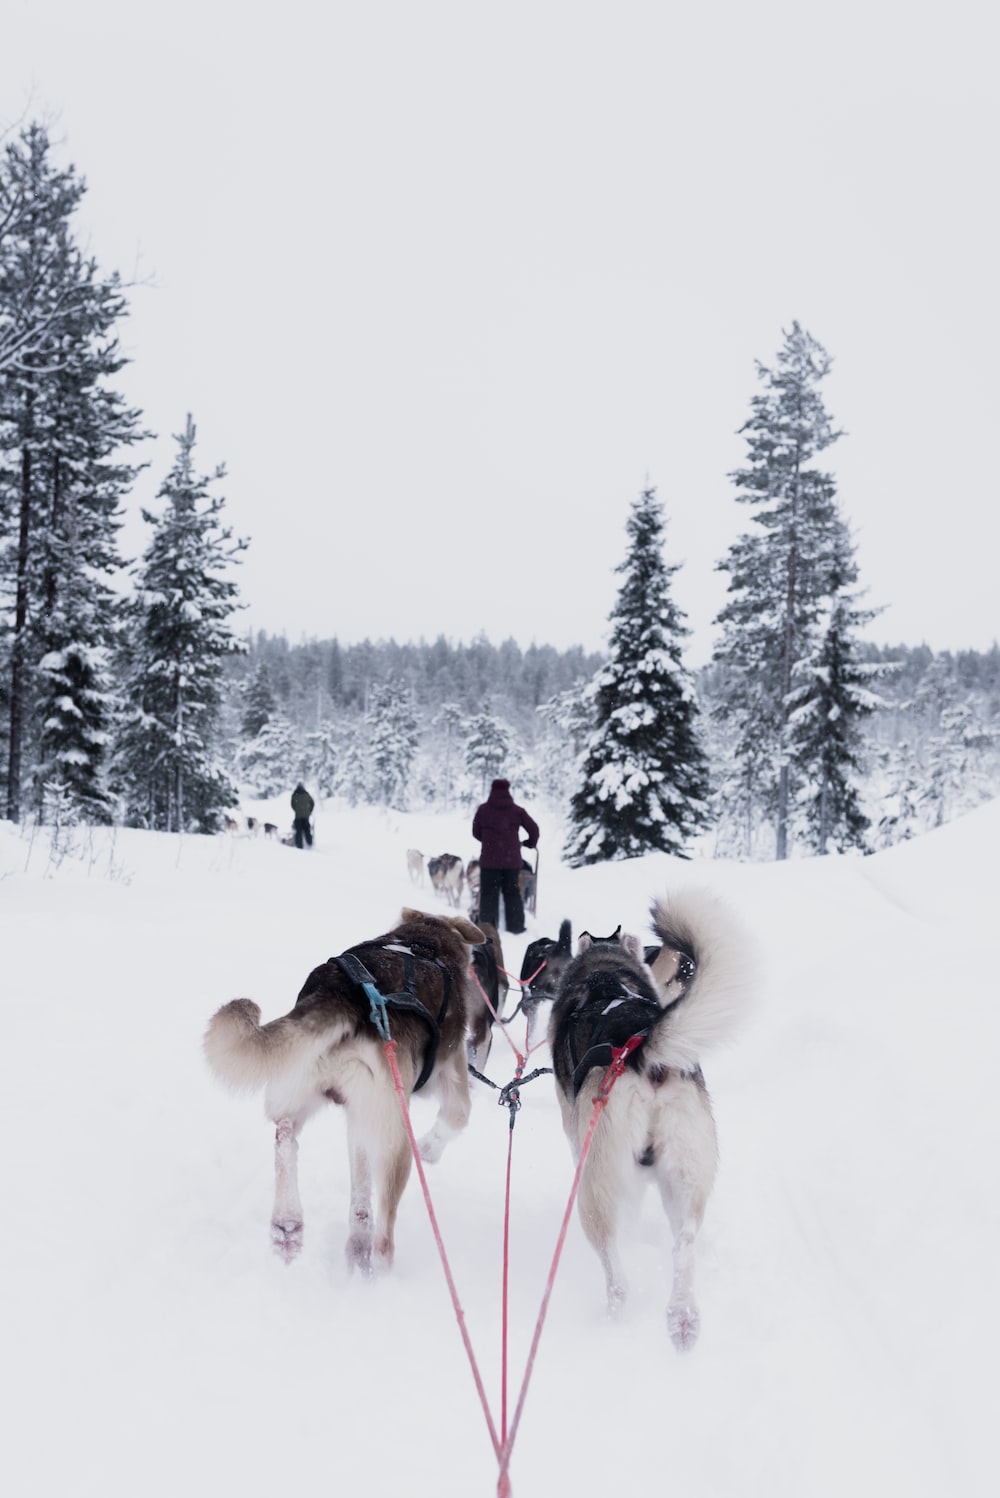 Sled Dogs Picture. Download Free Image